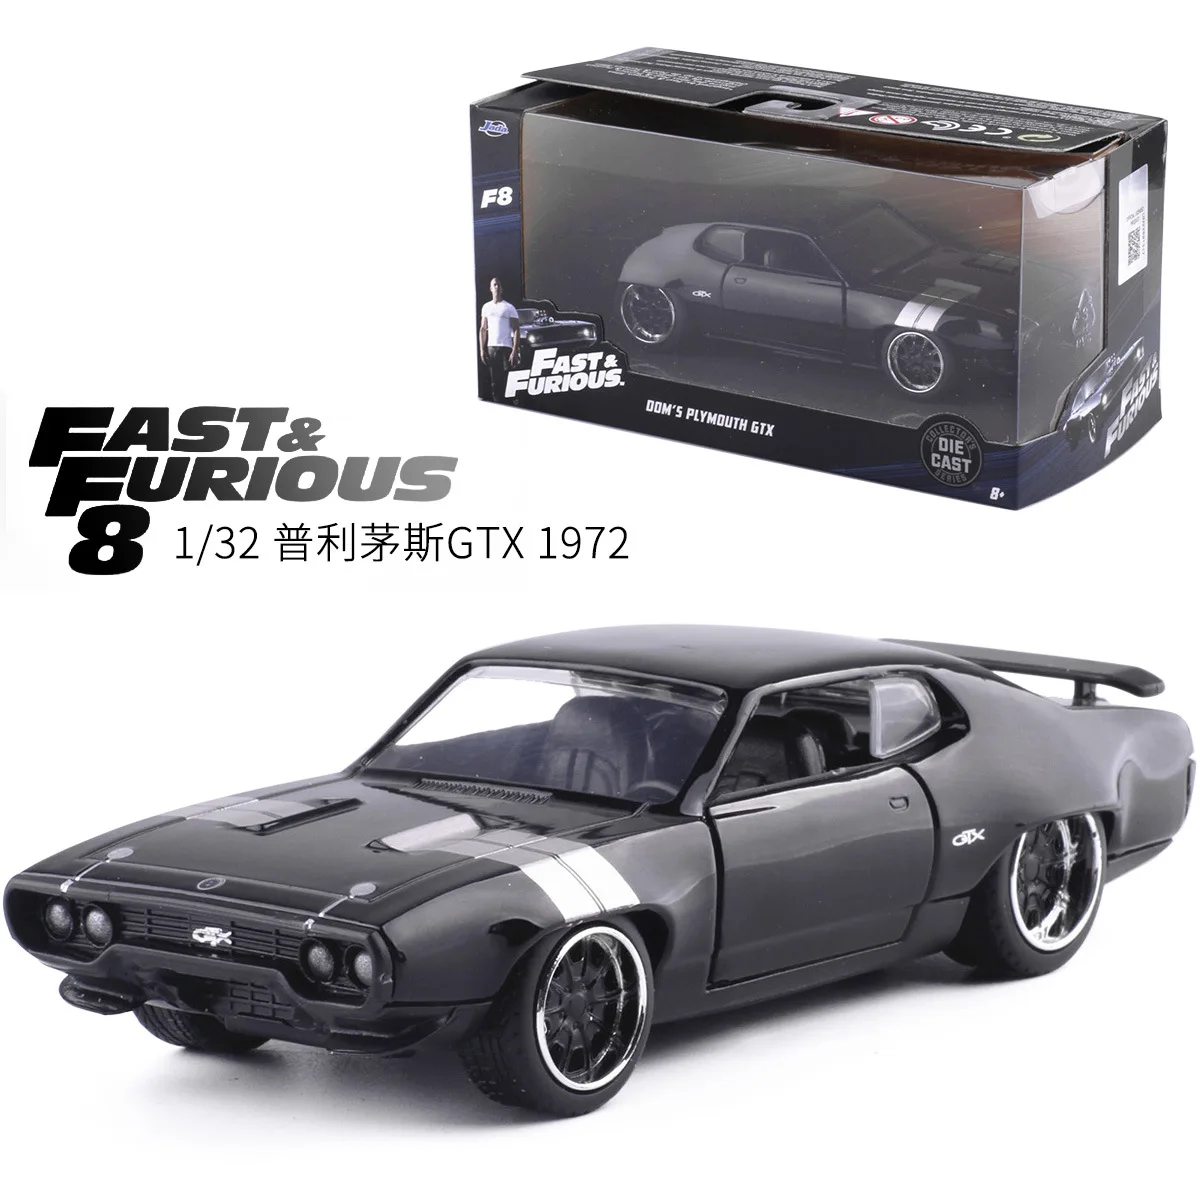 

Jada Diecast 1:32 Fast and Furious Alloy Car 1972 Plymouth GTX Metal Classic Model Street Race Car For Children Gift Collection